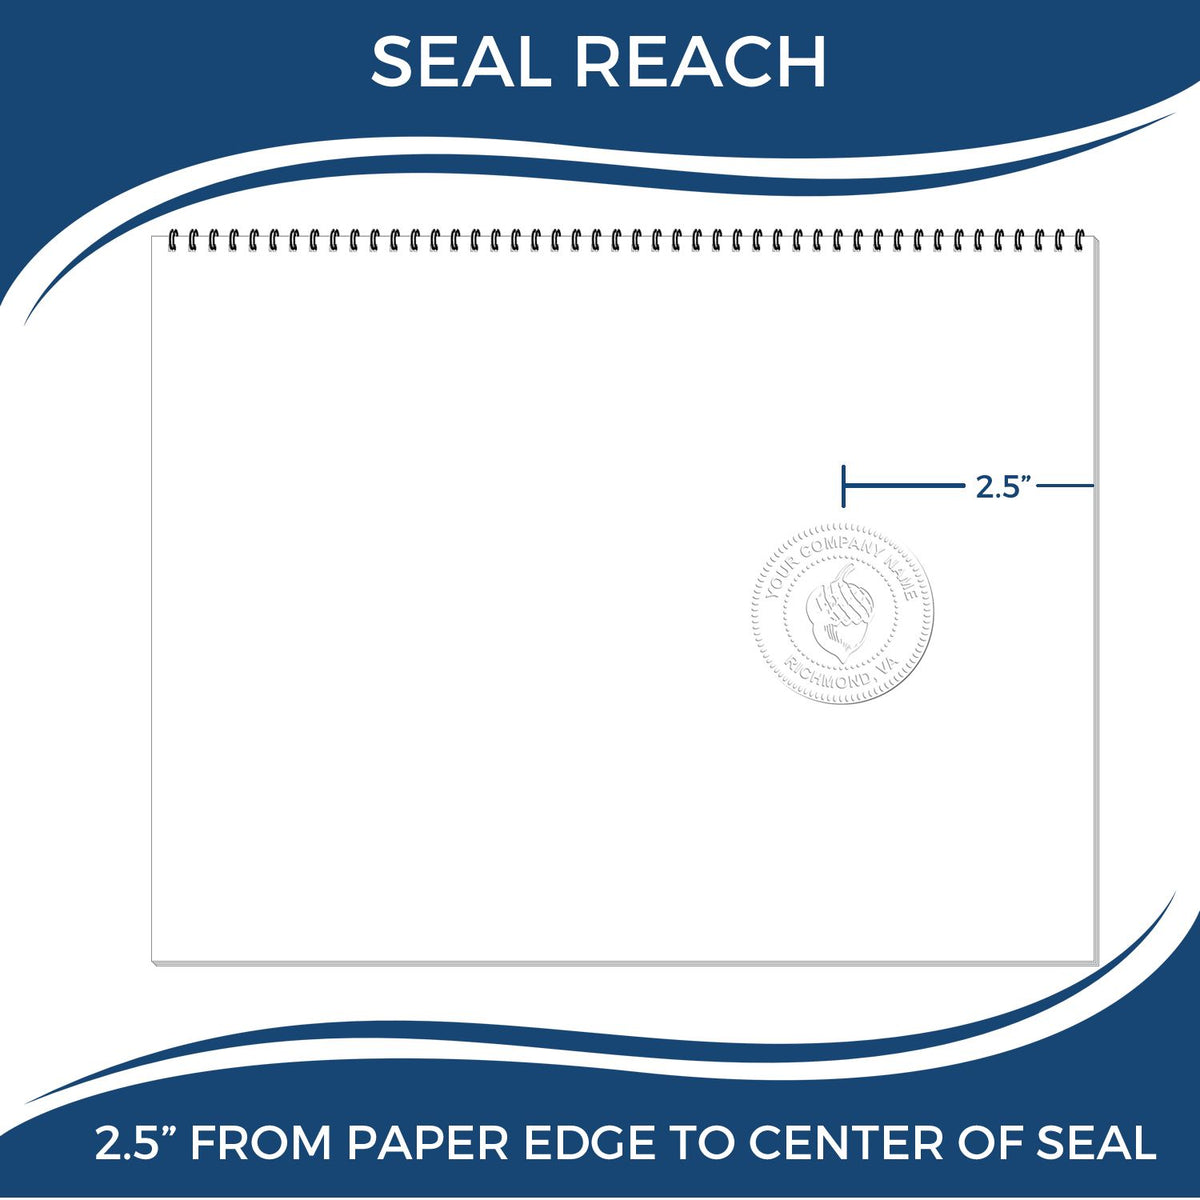 An infographic showing the seal reach which is represented by a ruler and a miniature seal image of the Long Reach Oklahoma Geology Seal